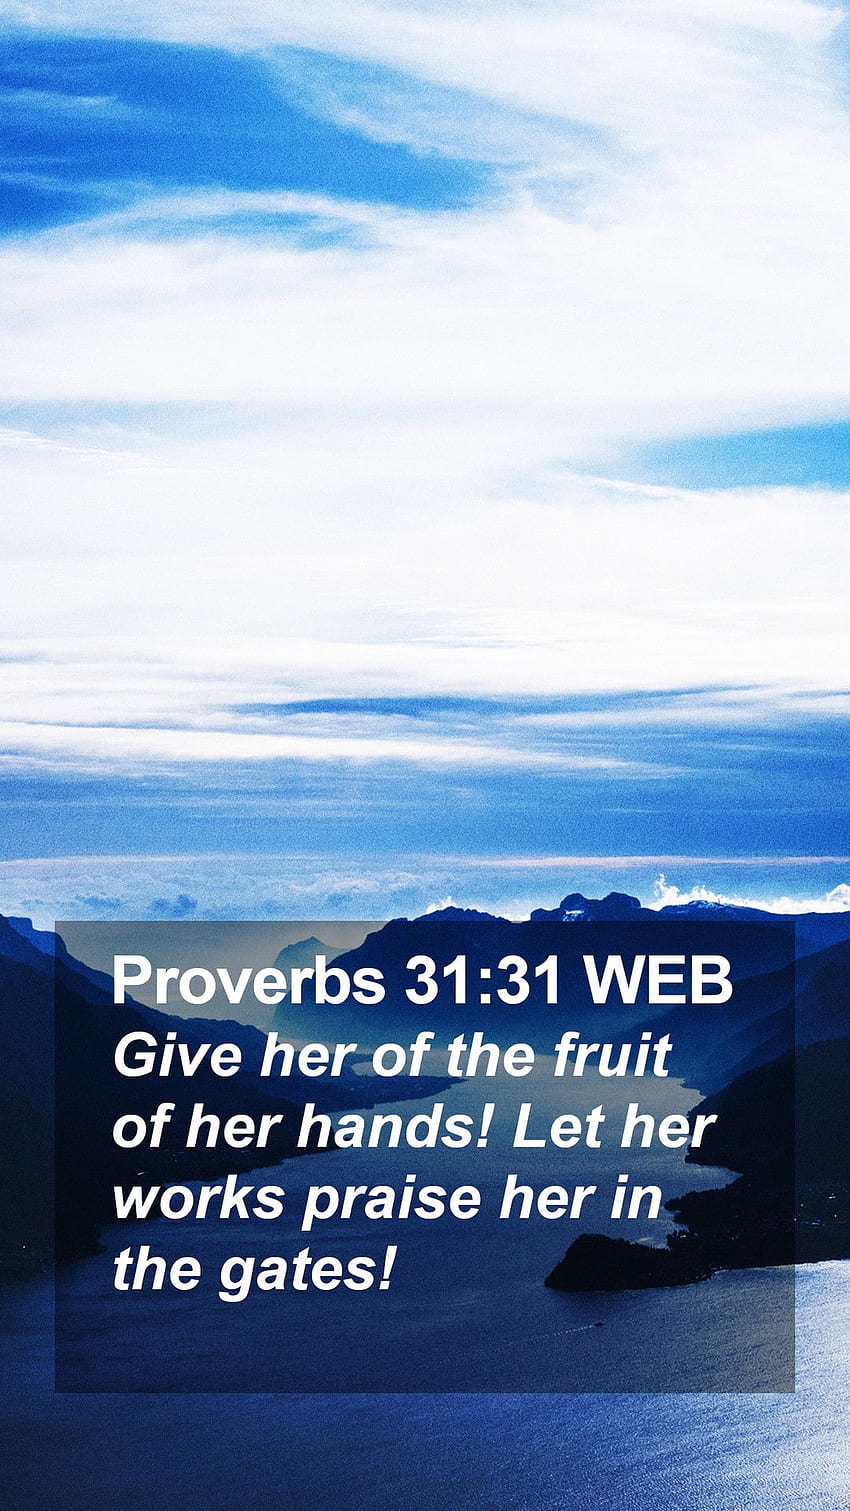 Proverbs 31:31 WEB Mobile Phone - Give her of the fruit of her hands! Let her works HD phone wallpaper